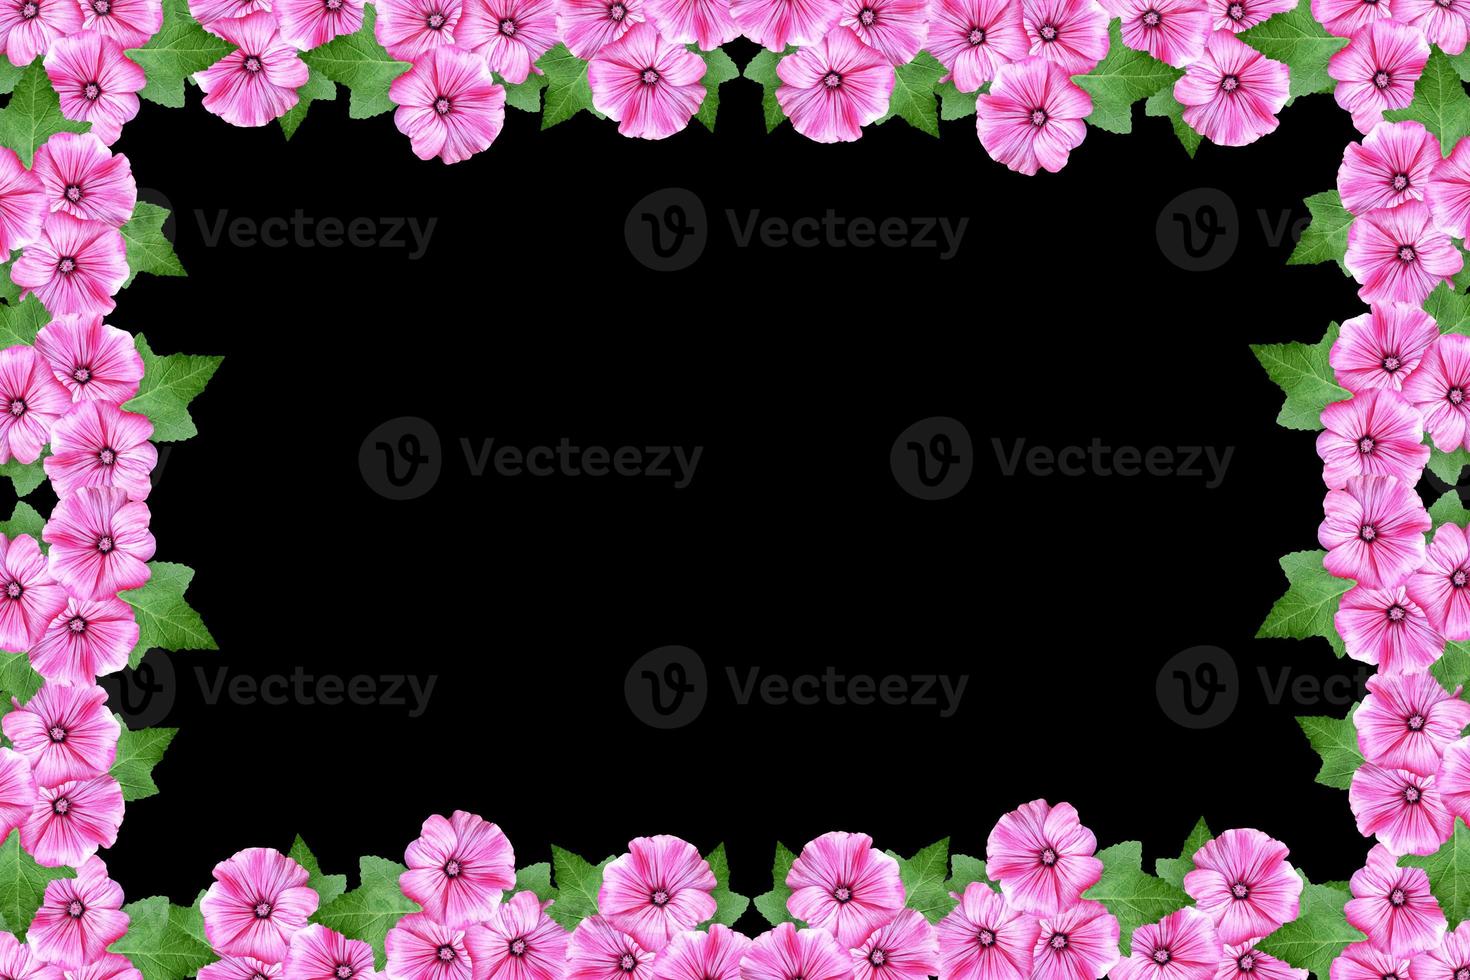 petunia flowers isolated on black background. bright flower photo